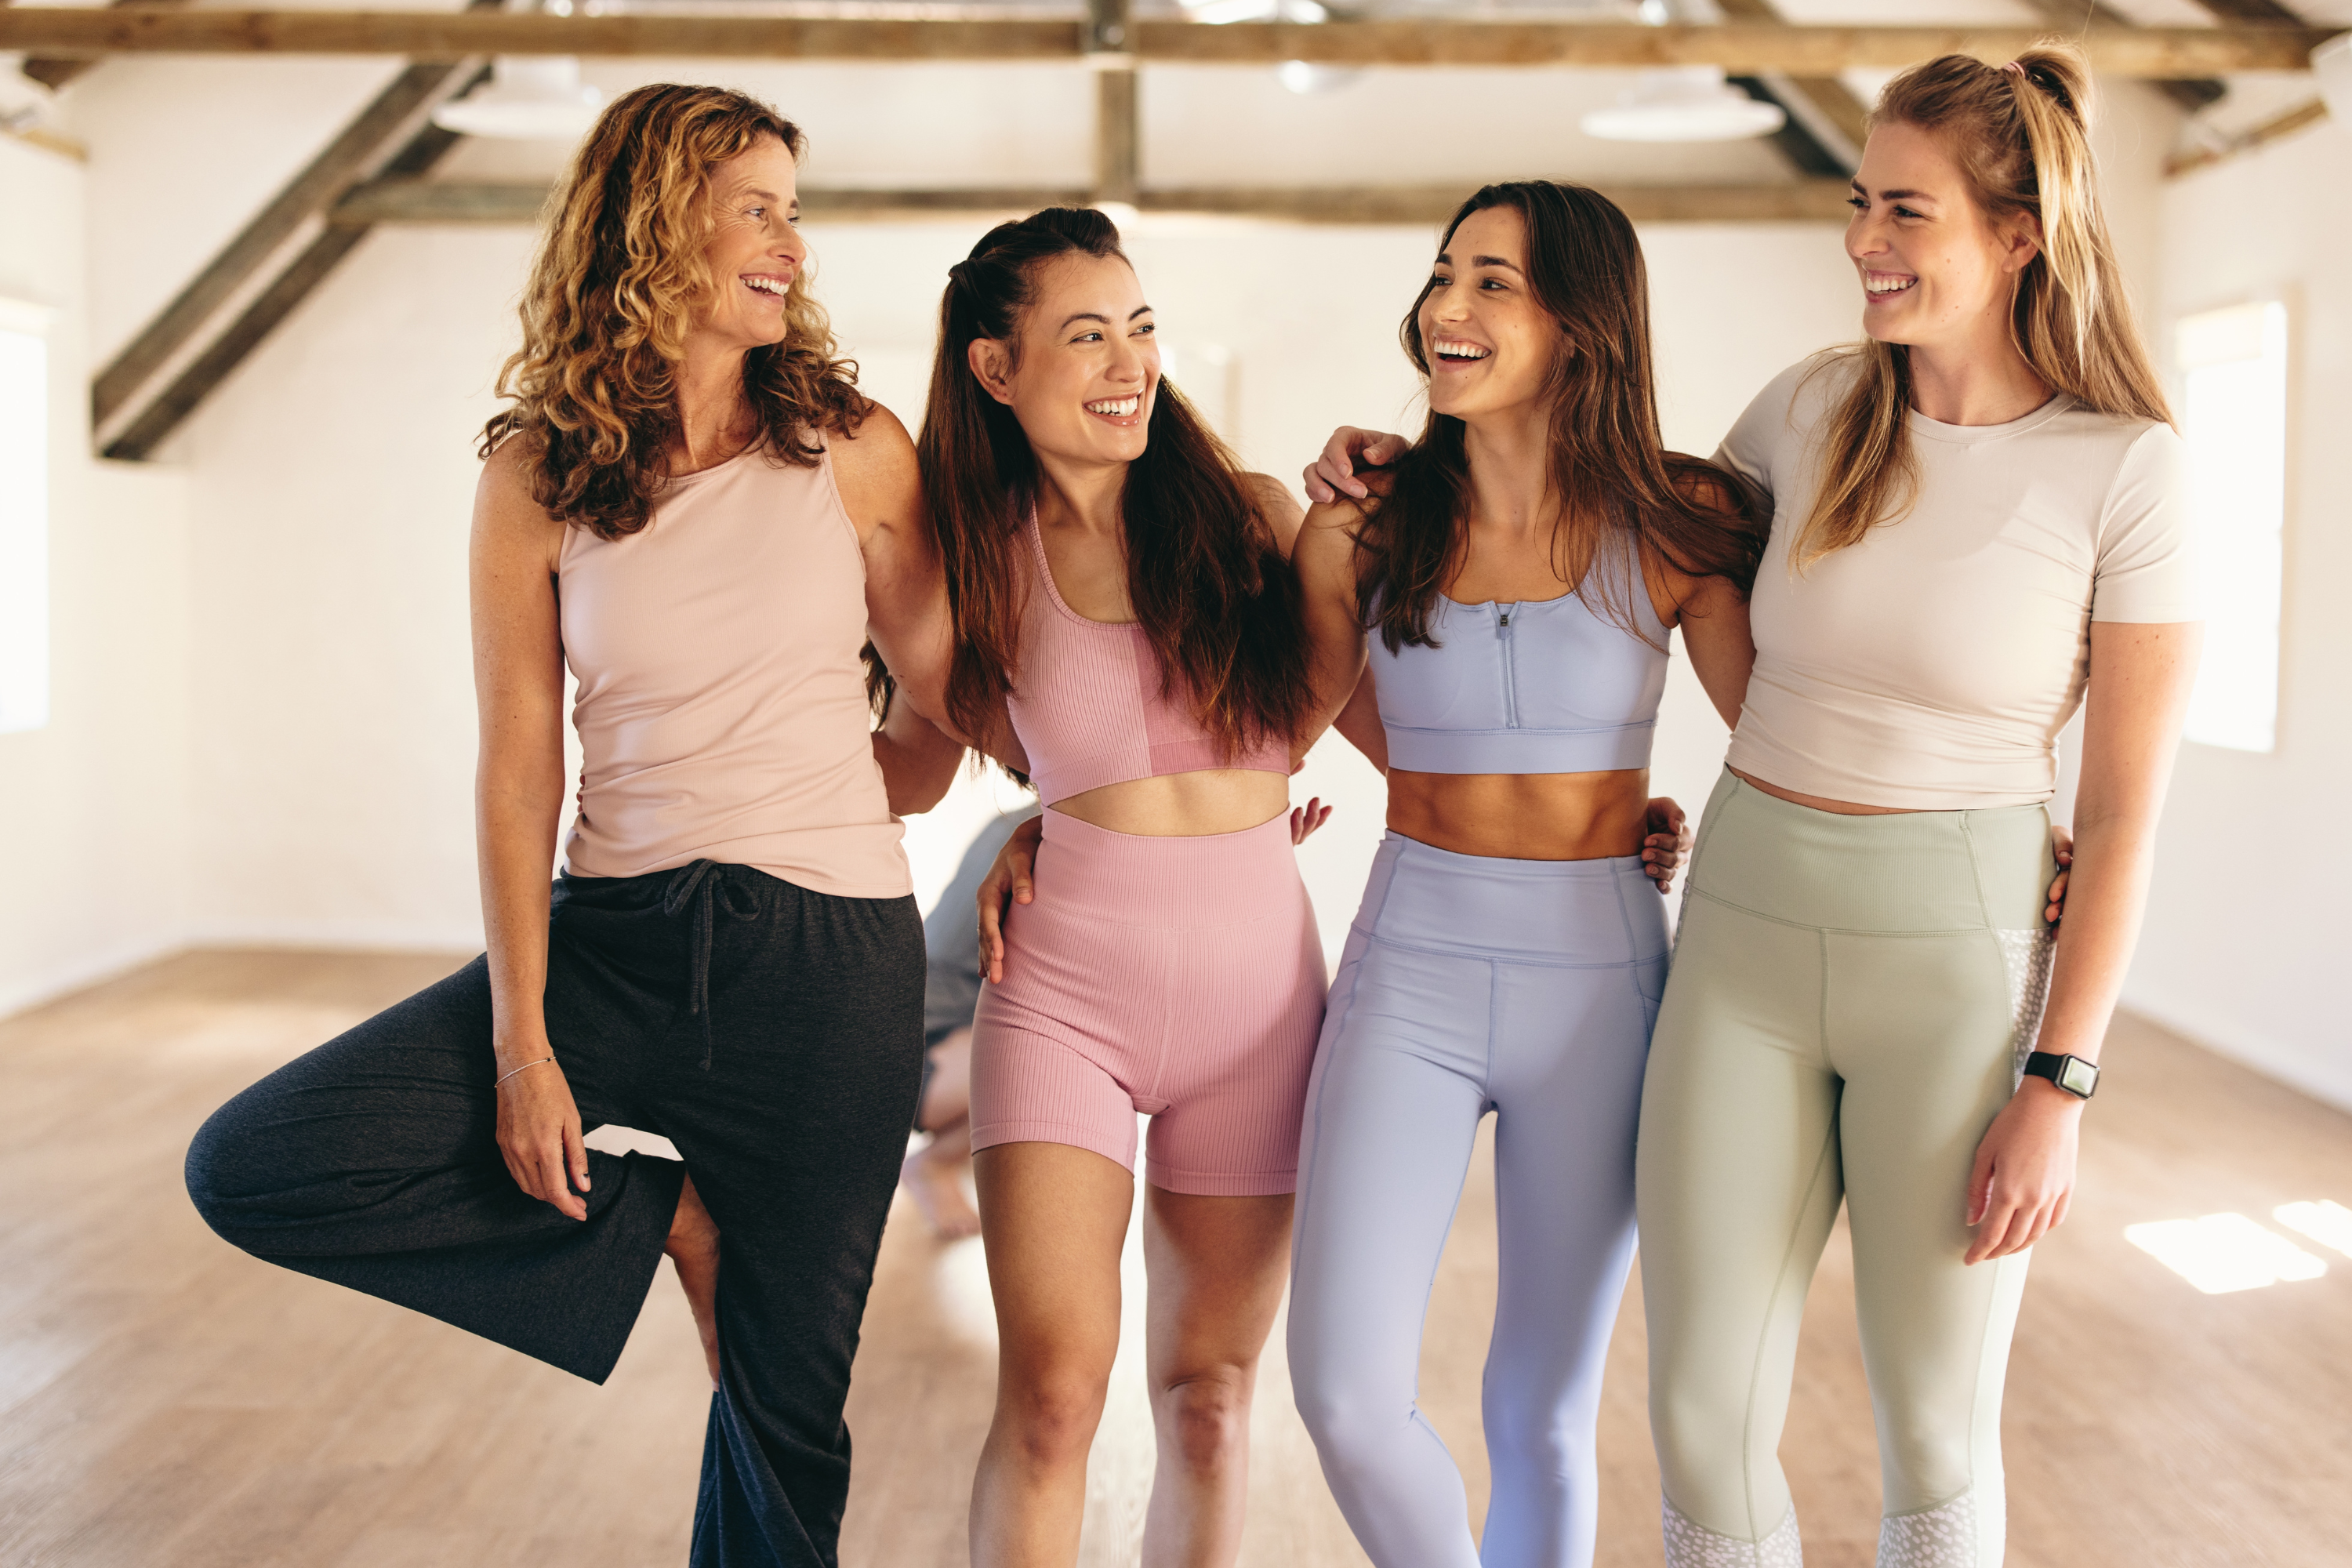 Four women in sportswear smile and stand together.